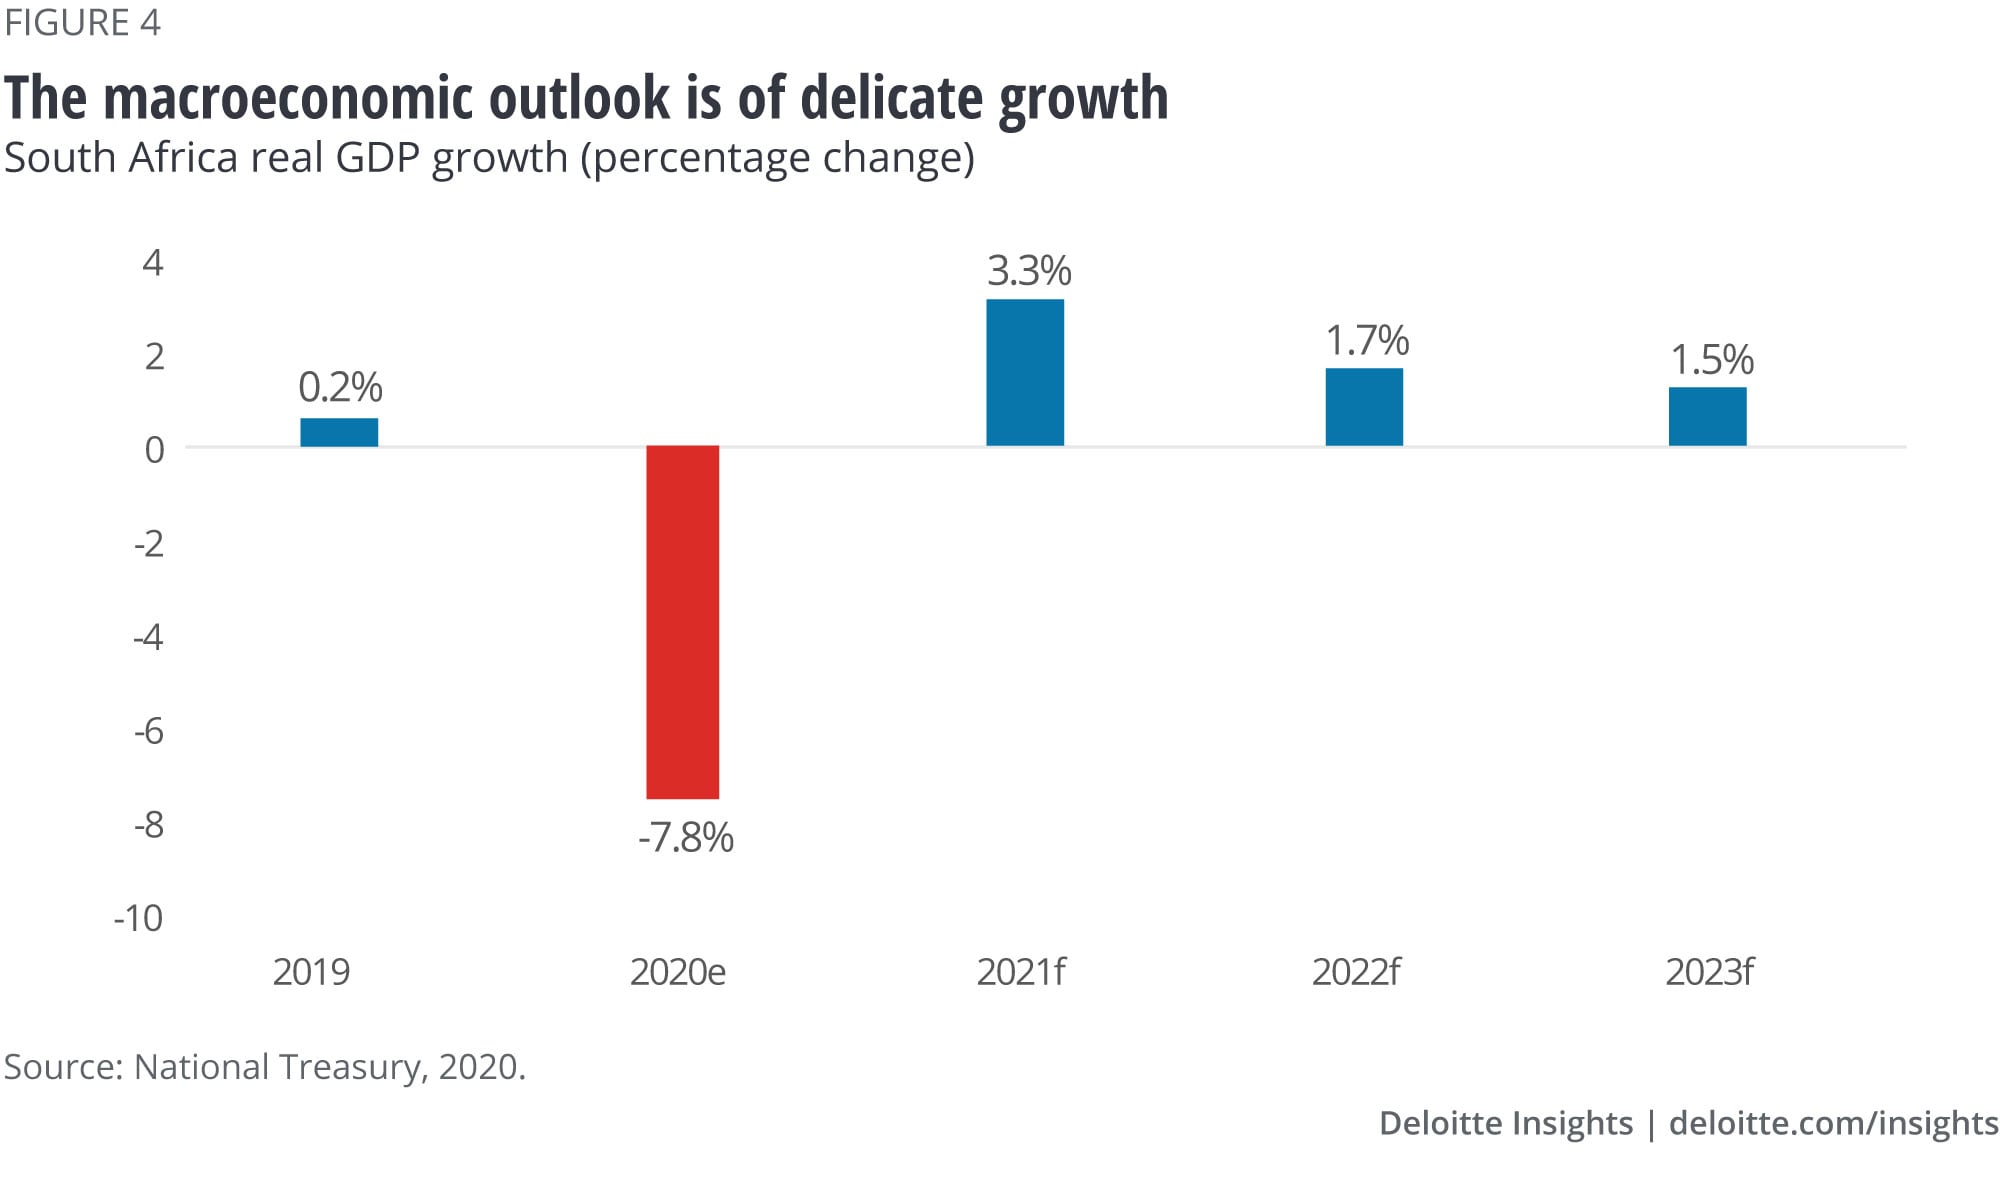 Macroeconomic outlook is for delicate growth